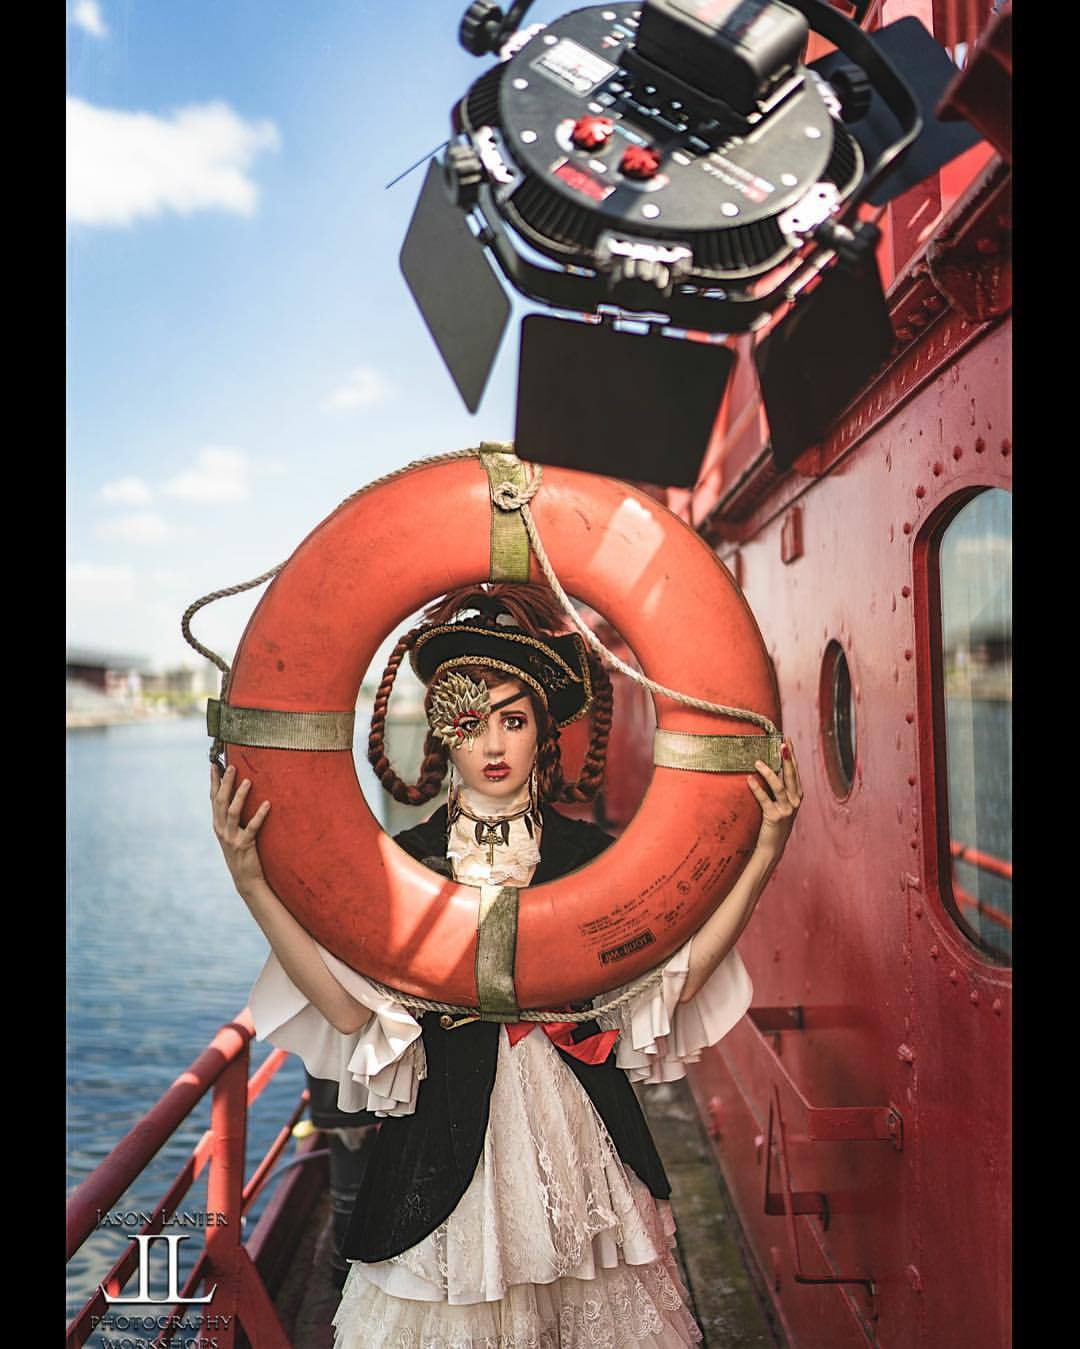 Overpowering the Sun…and the Crazy…today was an epic shoot with the one and only Ms. Maddi Dewalt in London. We had an entire film crew there, drones, etc on an antique Lightship Boat that we rented.
For the first time ever I shot with a Rotolight...